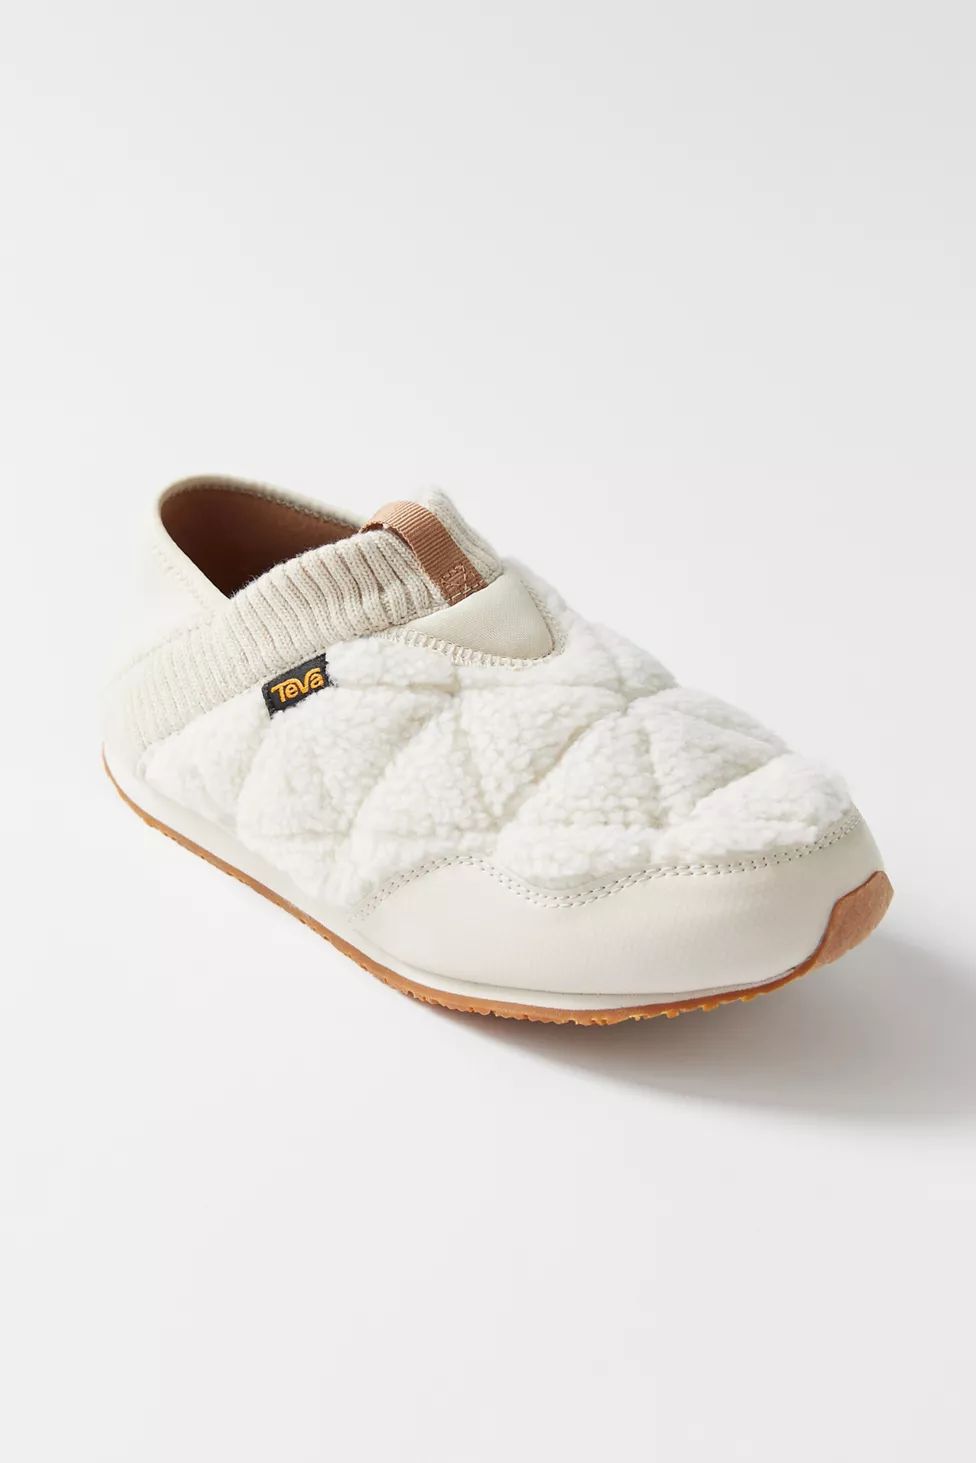 Teva ReEMBER Fleece Slip-On Shoe | Urban Outfitters (US and RoW)